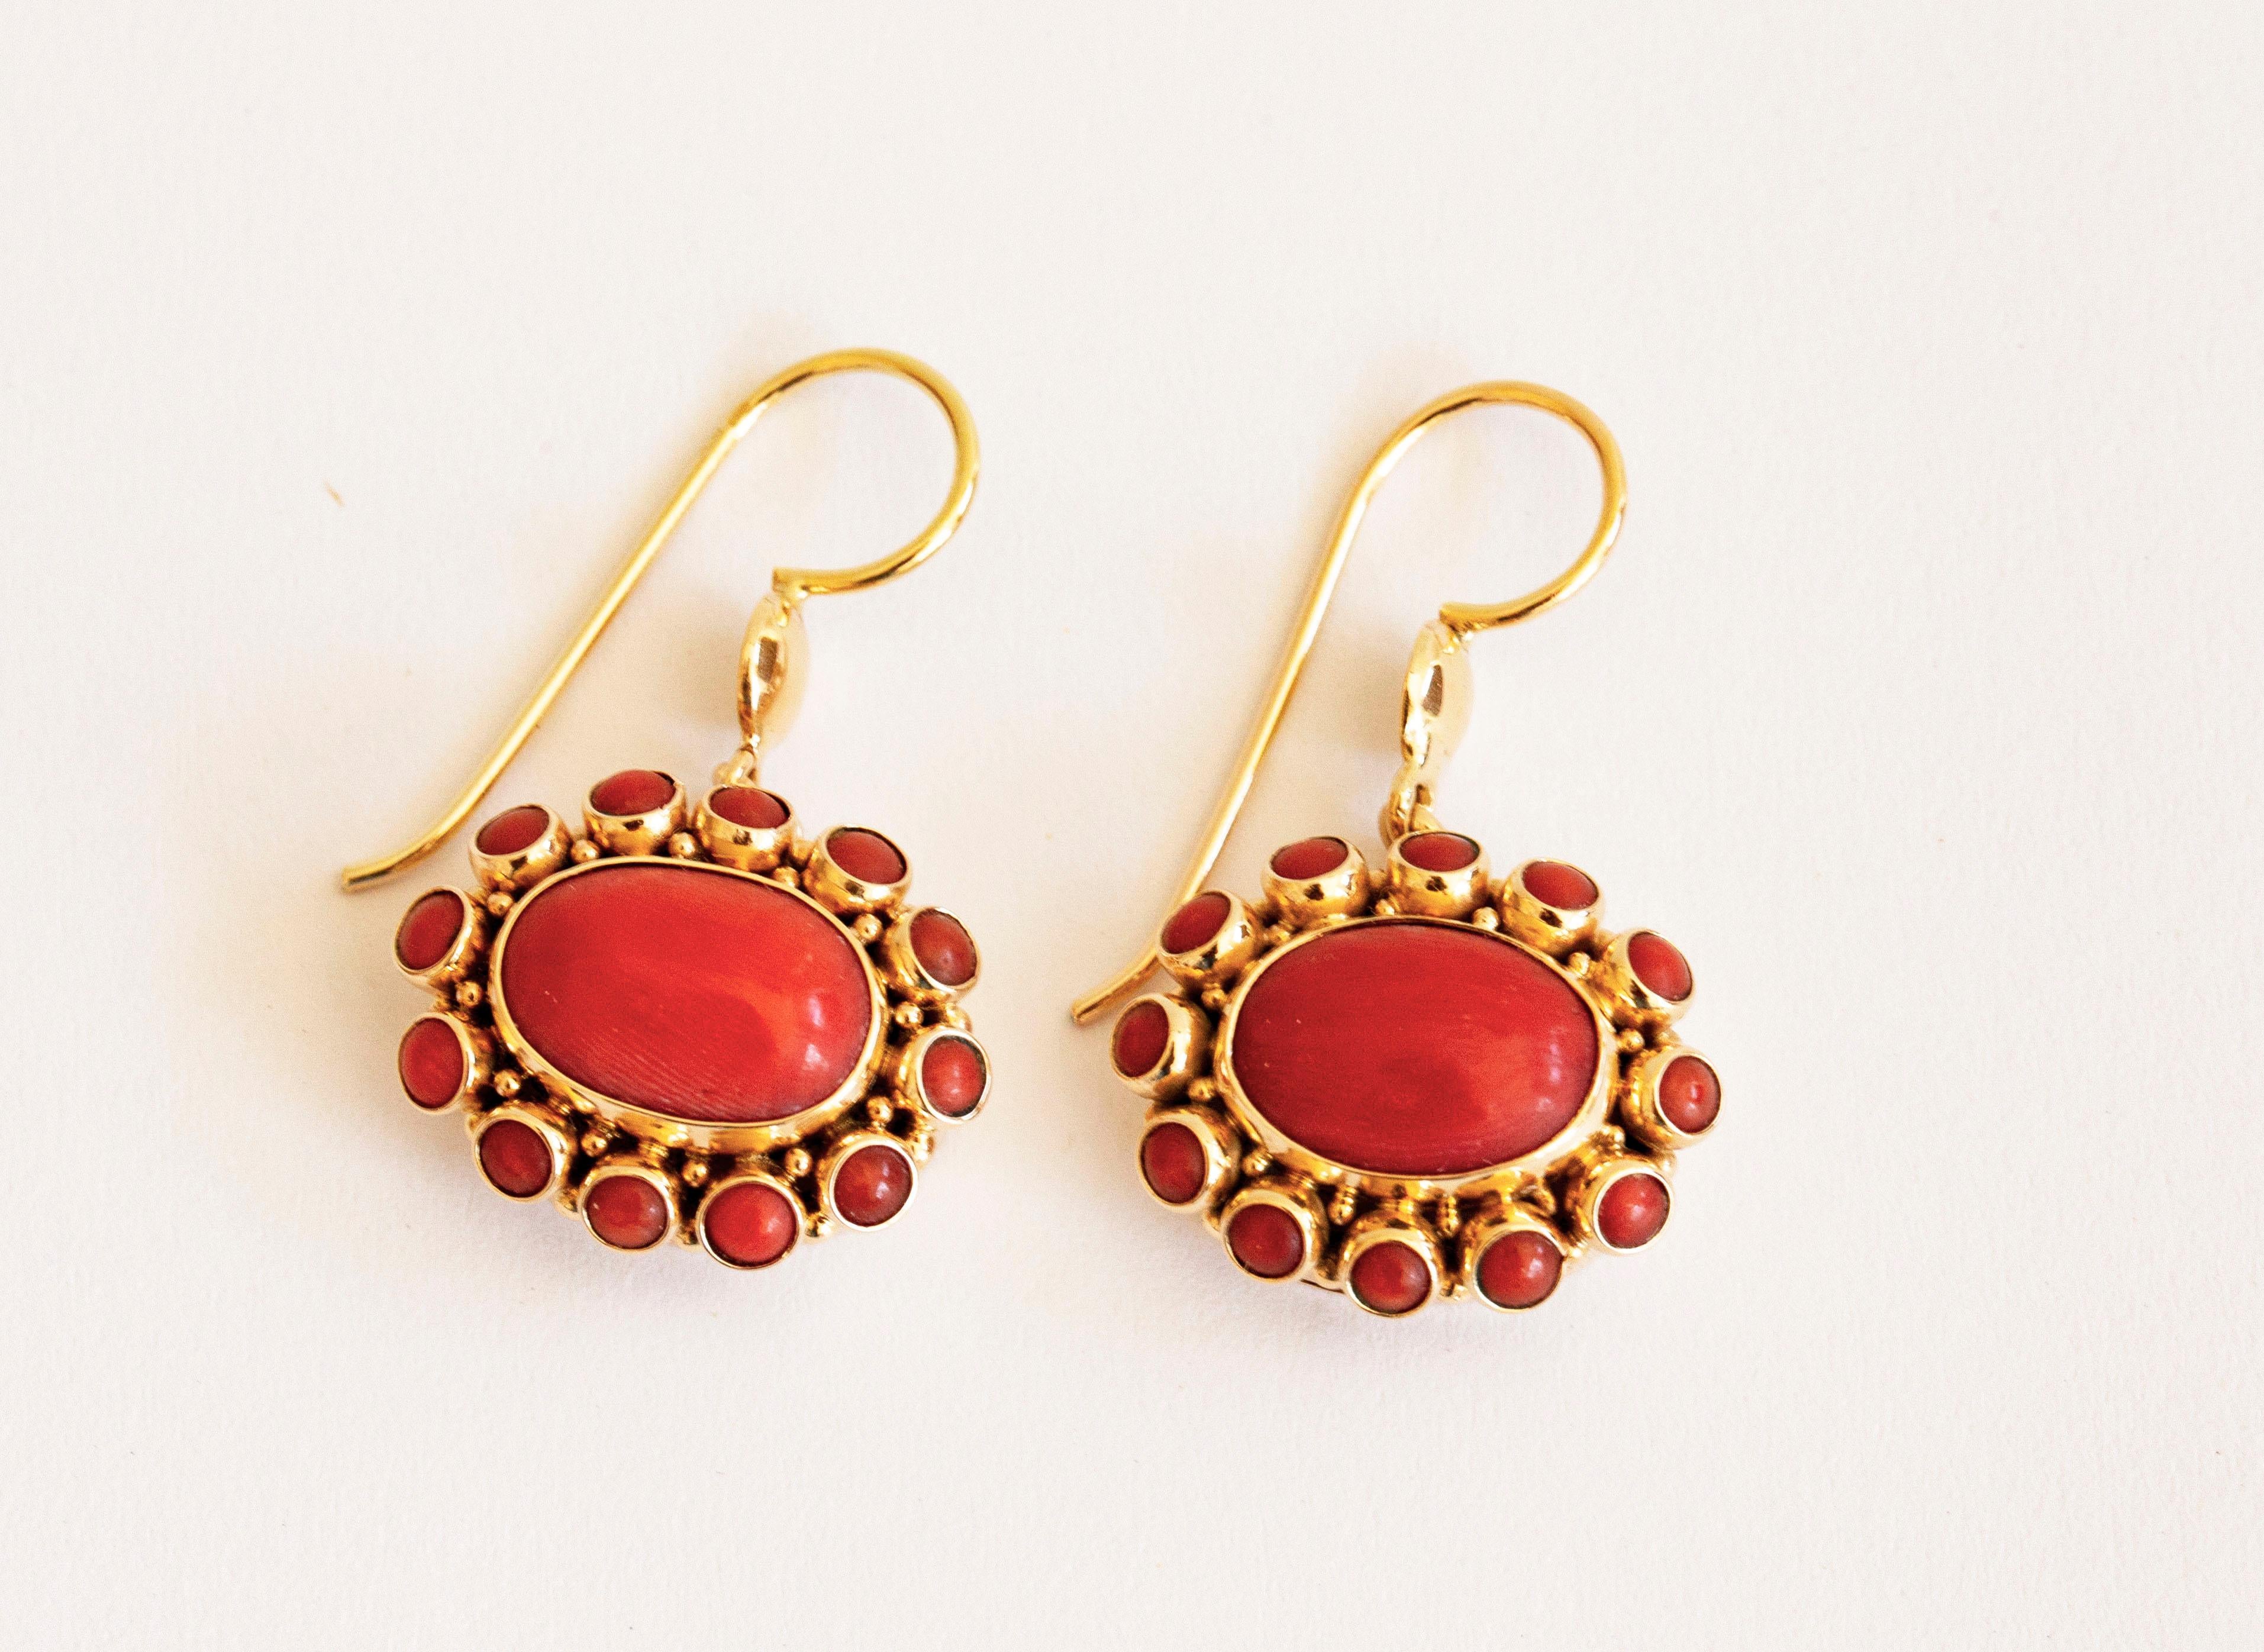 A pair of vintage Dutch pendant earrings made of 14 karat solid gold and an entourage of red coral. The coral beads feature a nice red color and the earrings are in really good condition with lovely age related patina. 
The earrings are 38 mm long